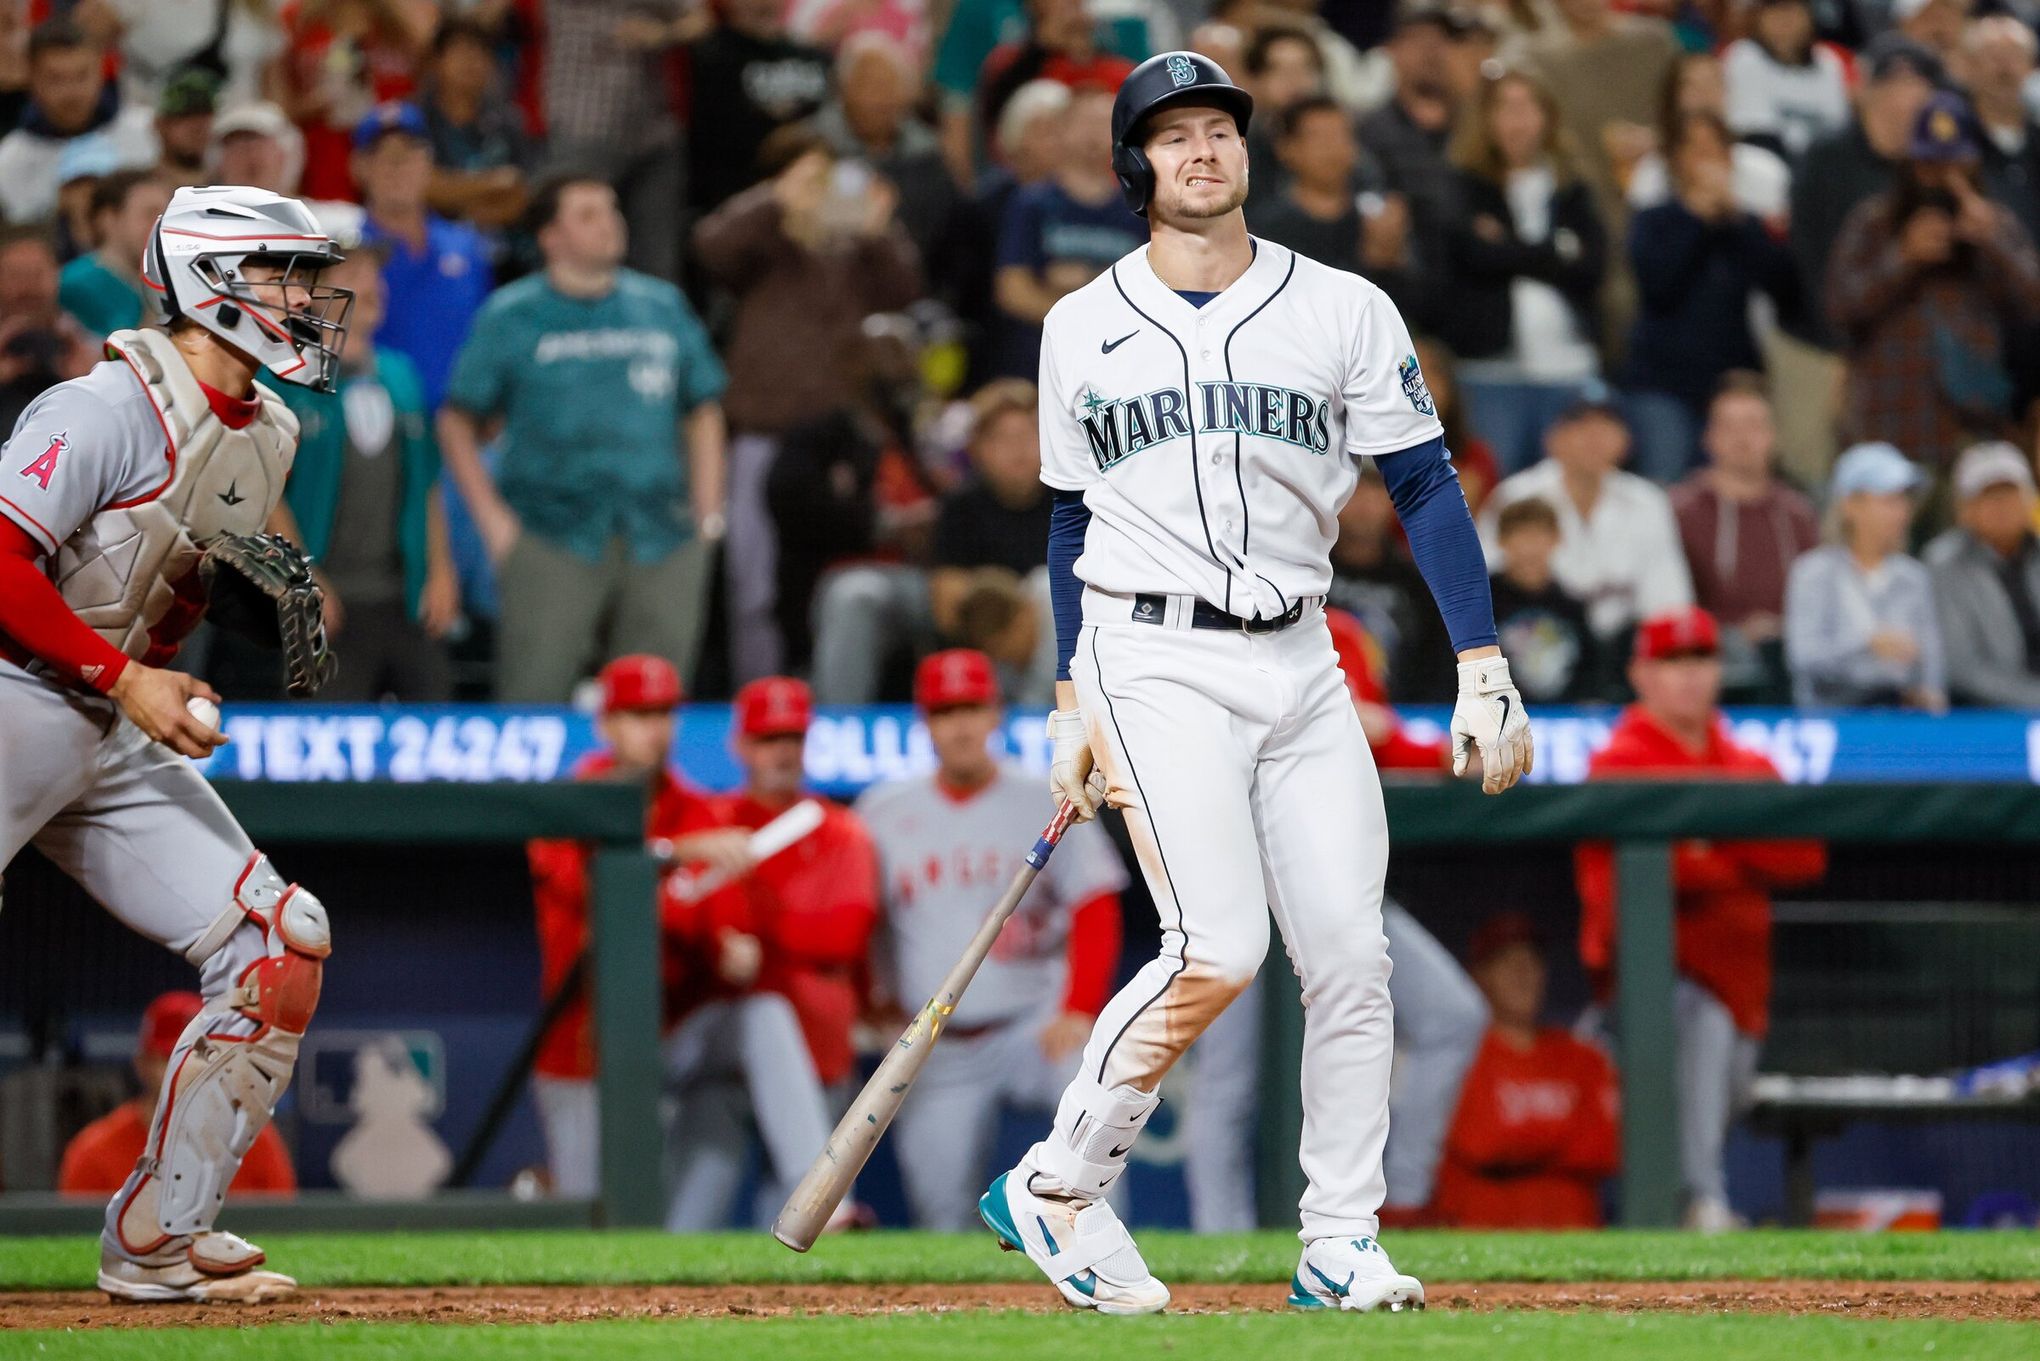 Mariners lose third straight series with loss to Nationals